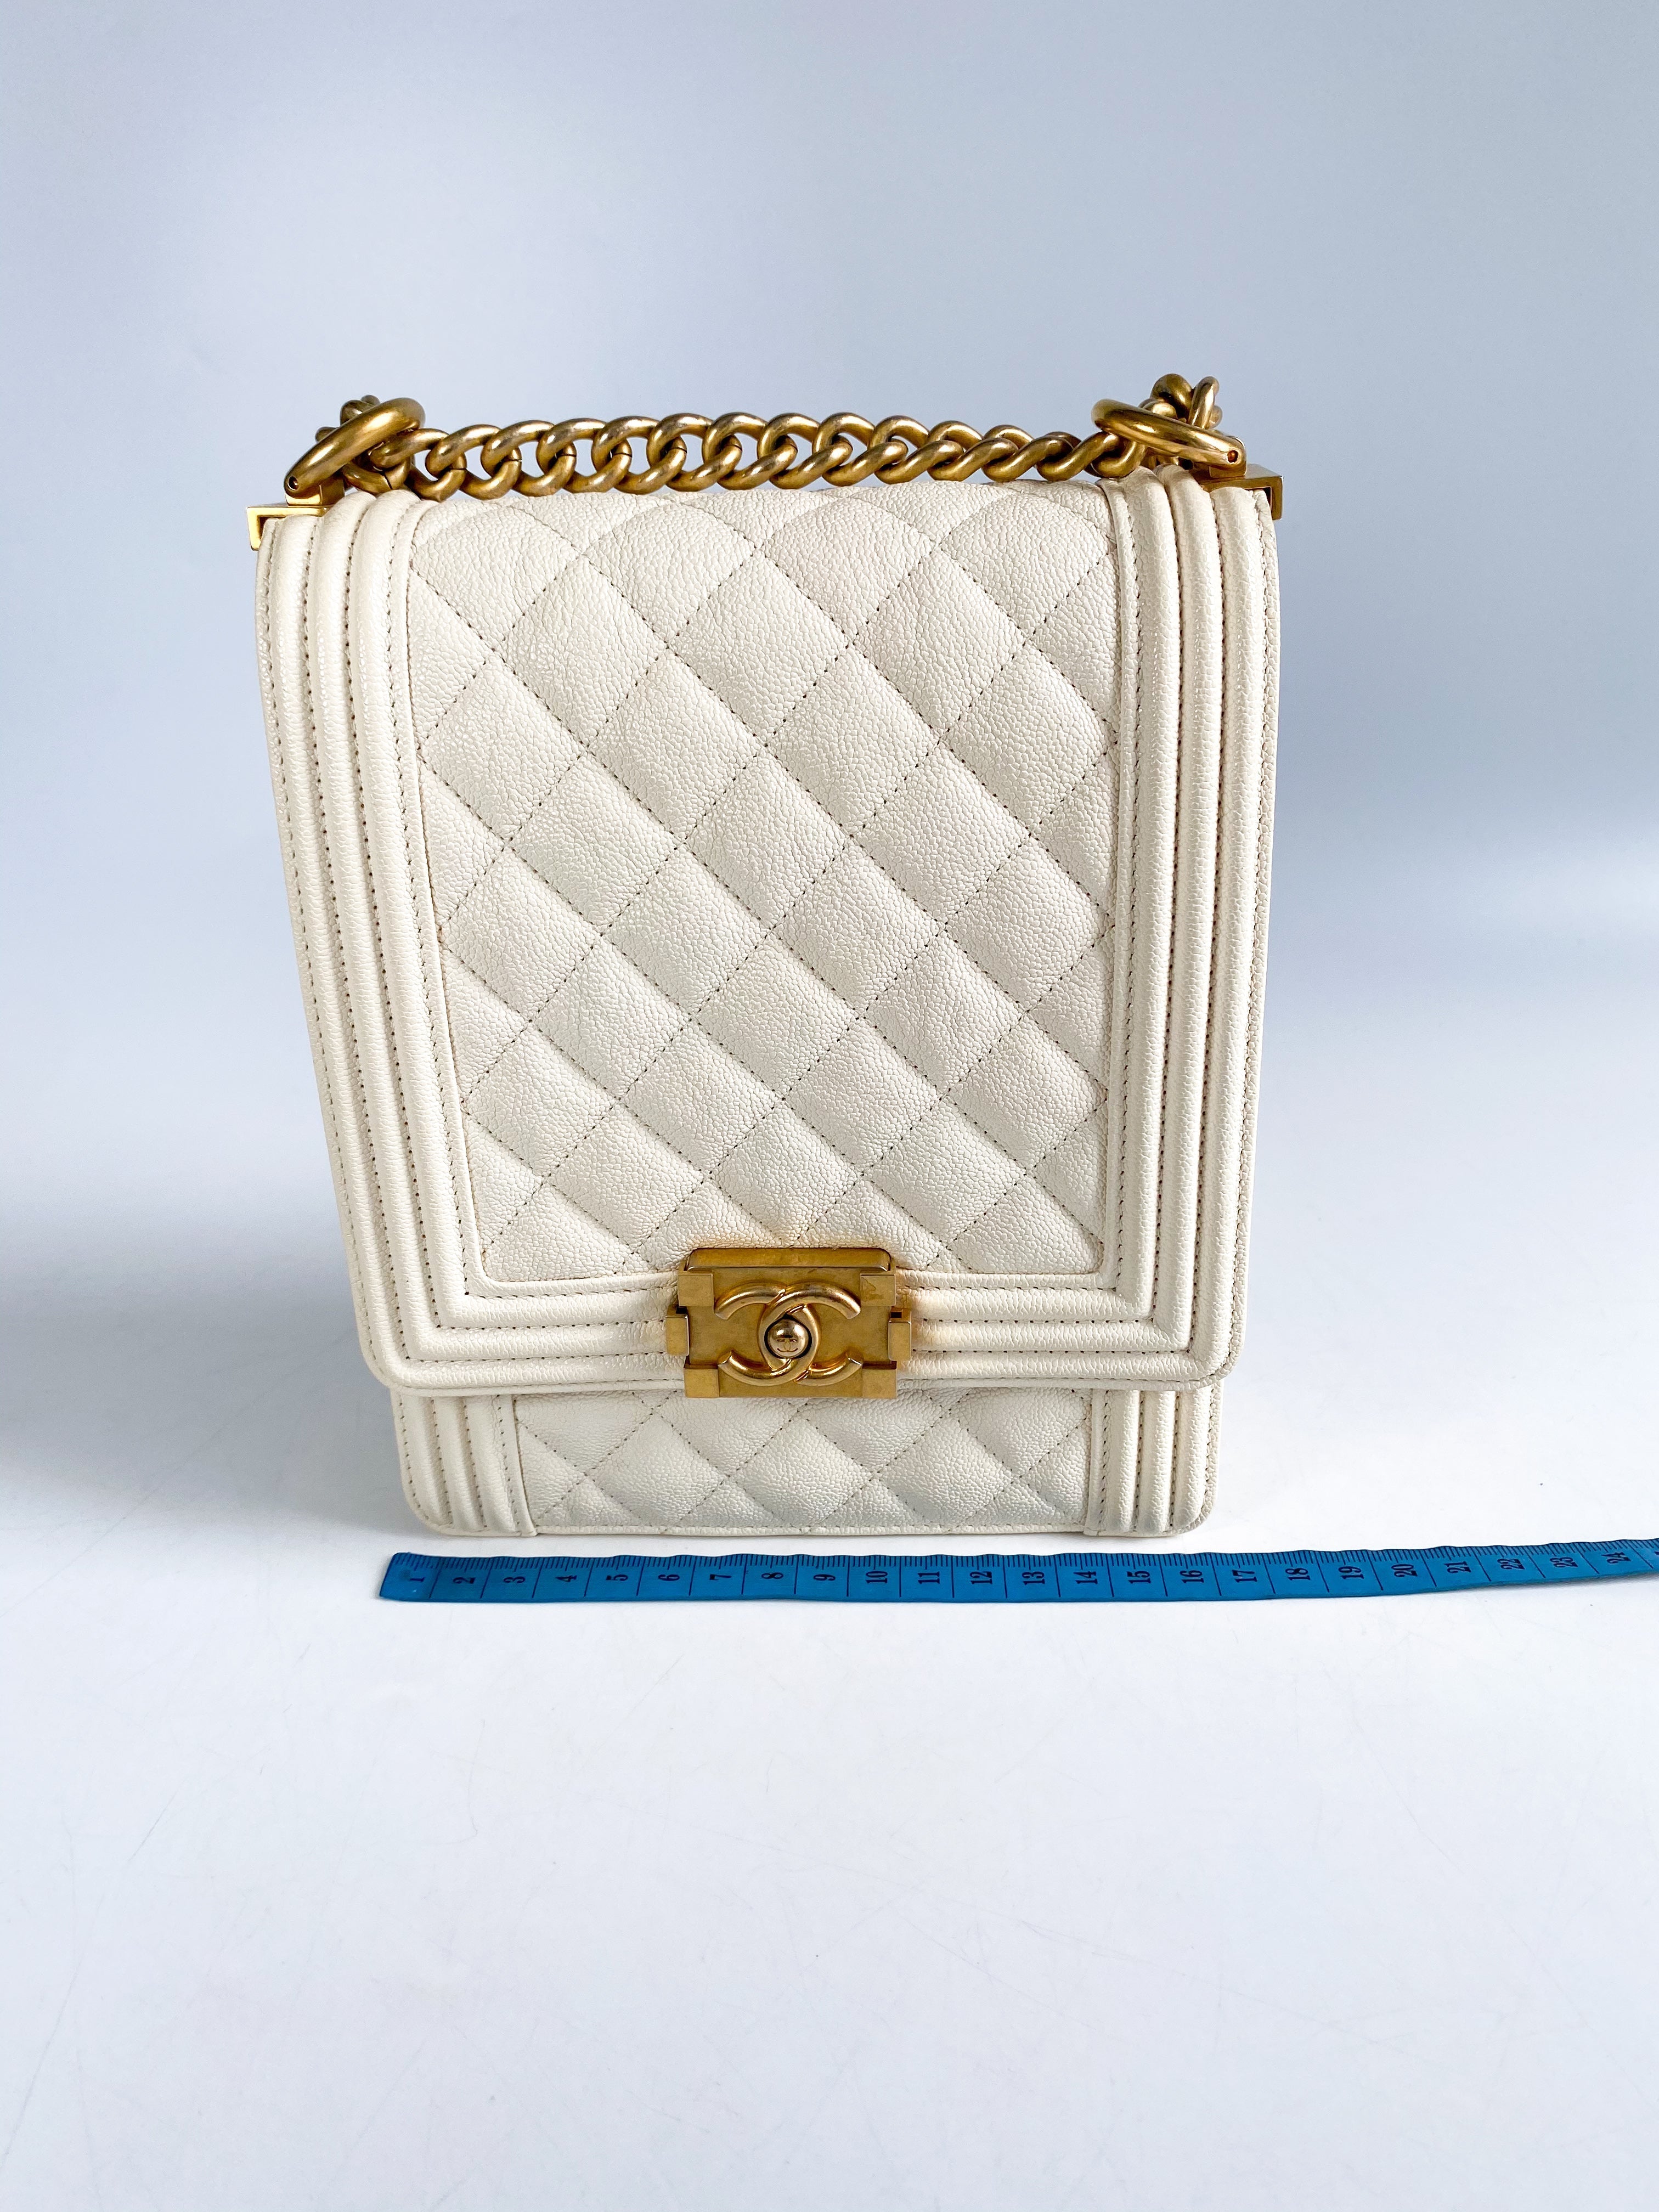 Chanel Cruise Boy North South in White Caviar Leather and Aged Gold Hardware Series 26